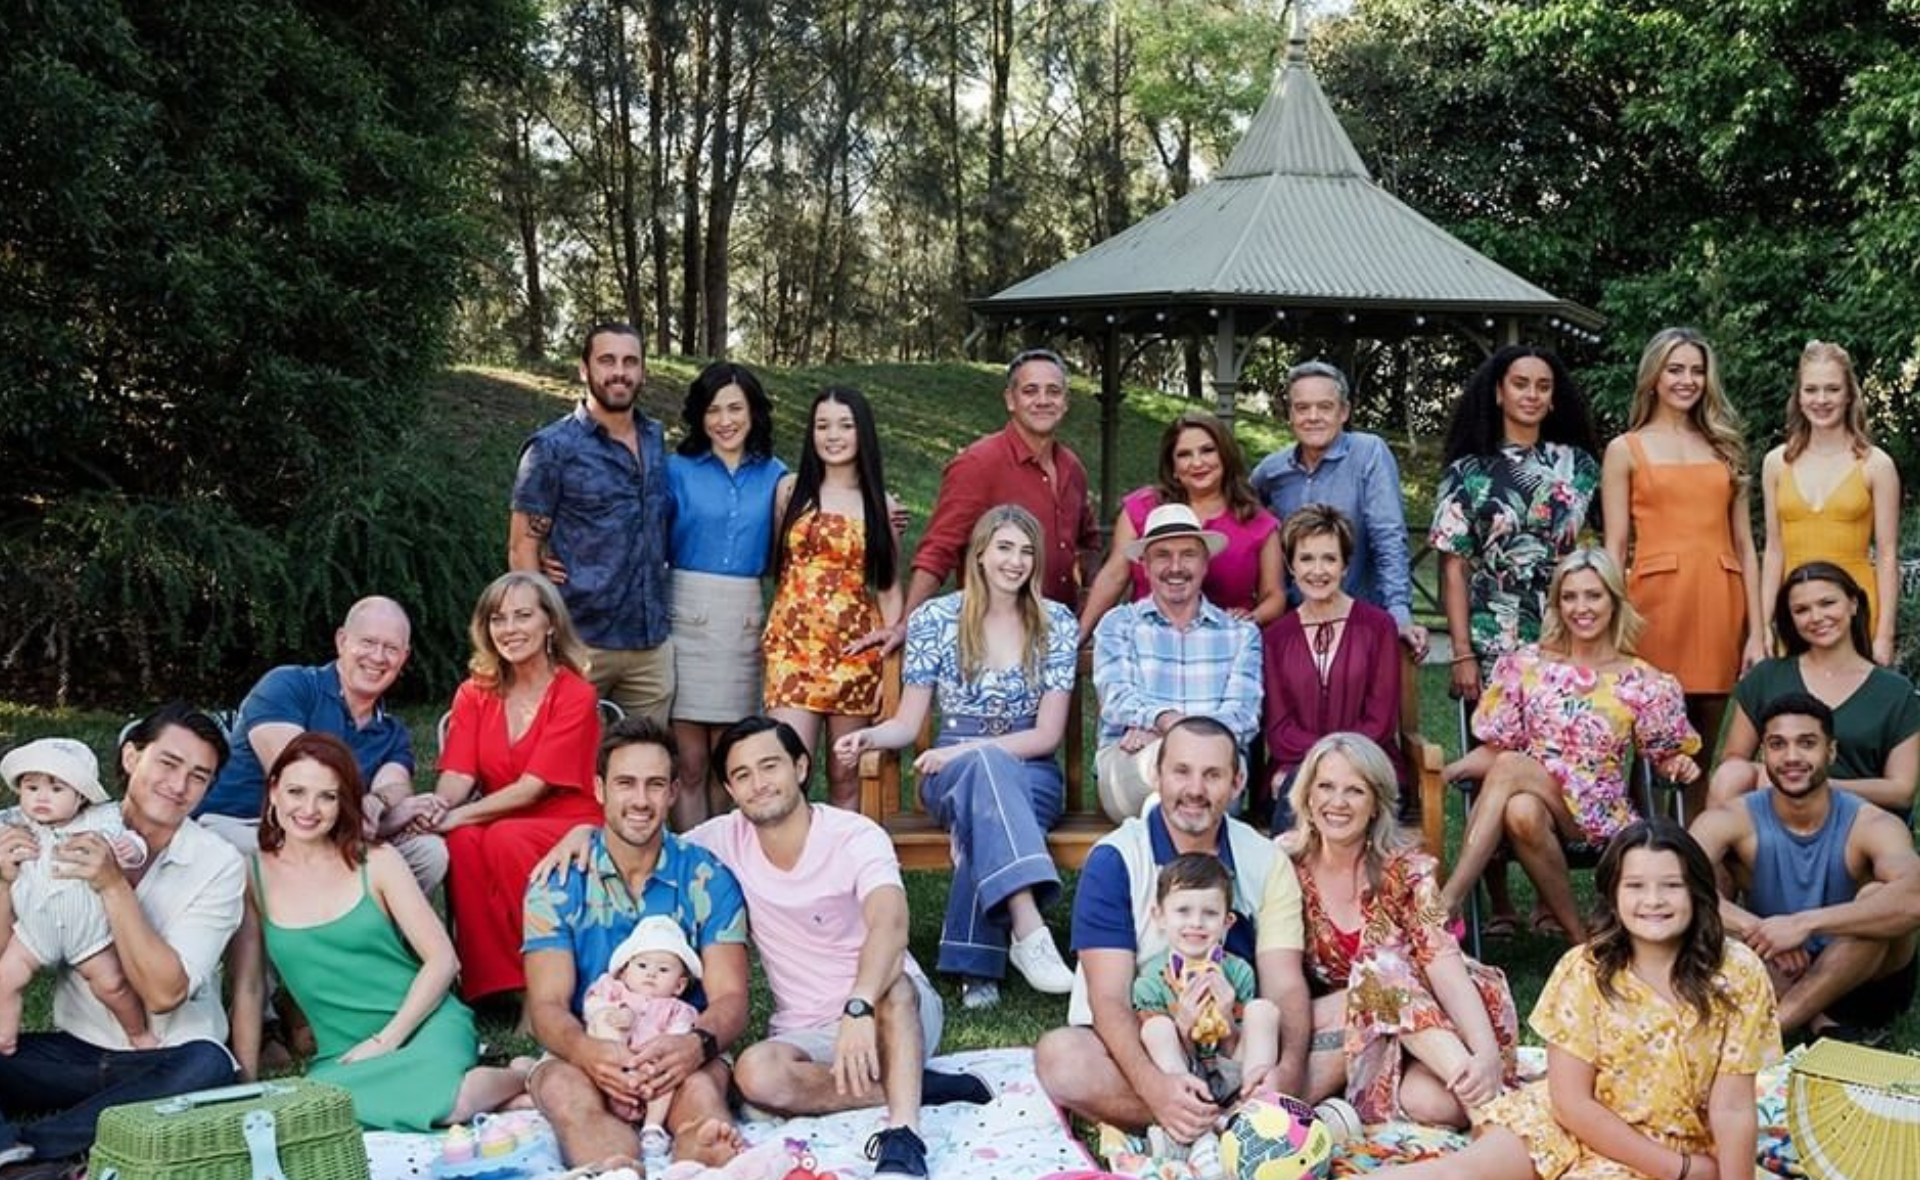 Neighbours revival cast: Who will be in the new season?